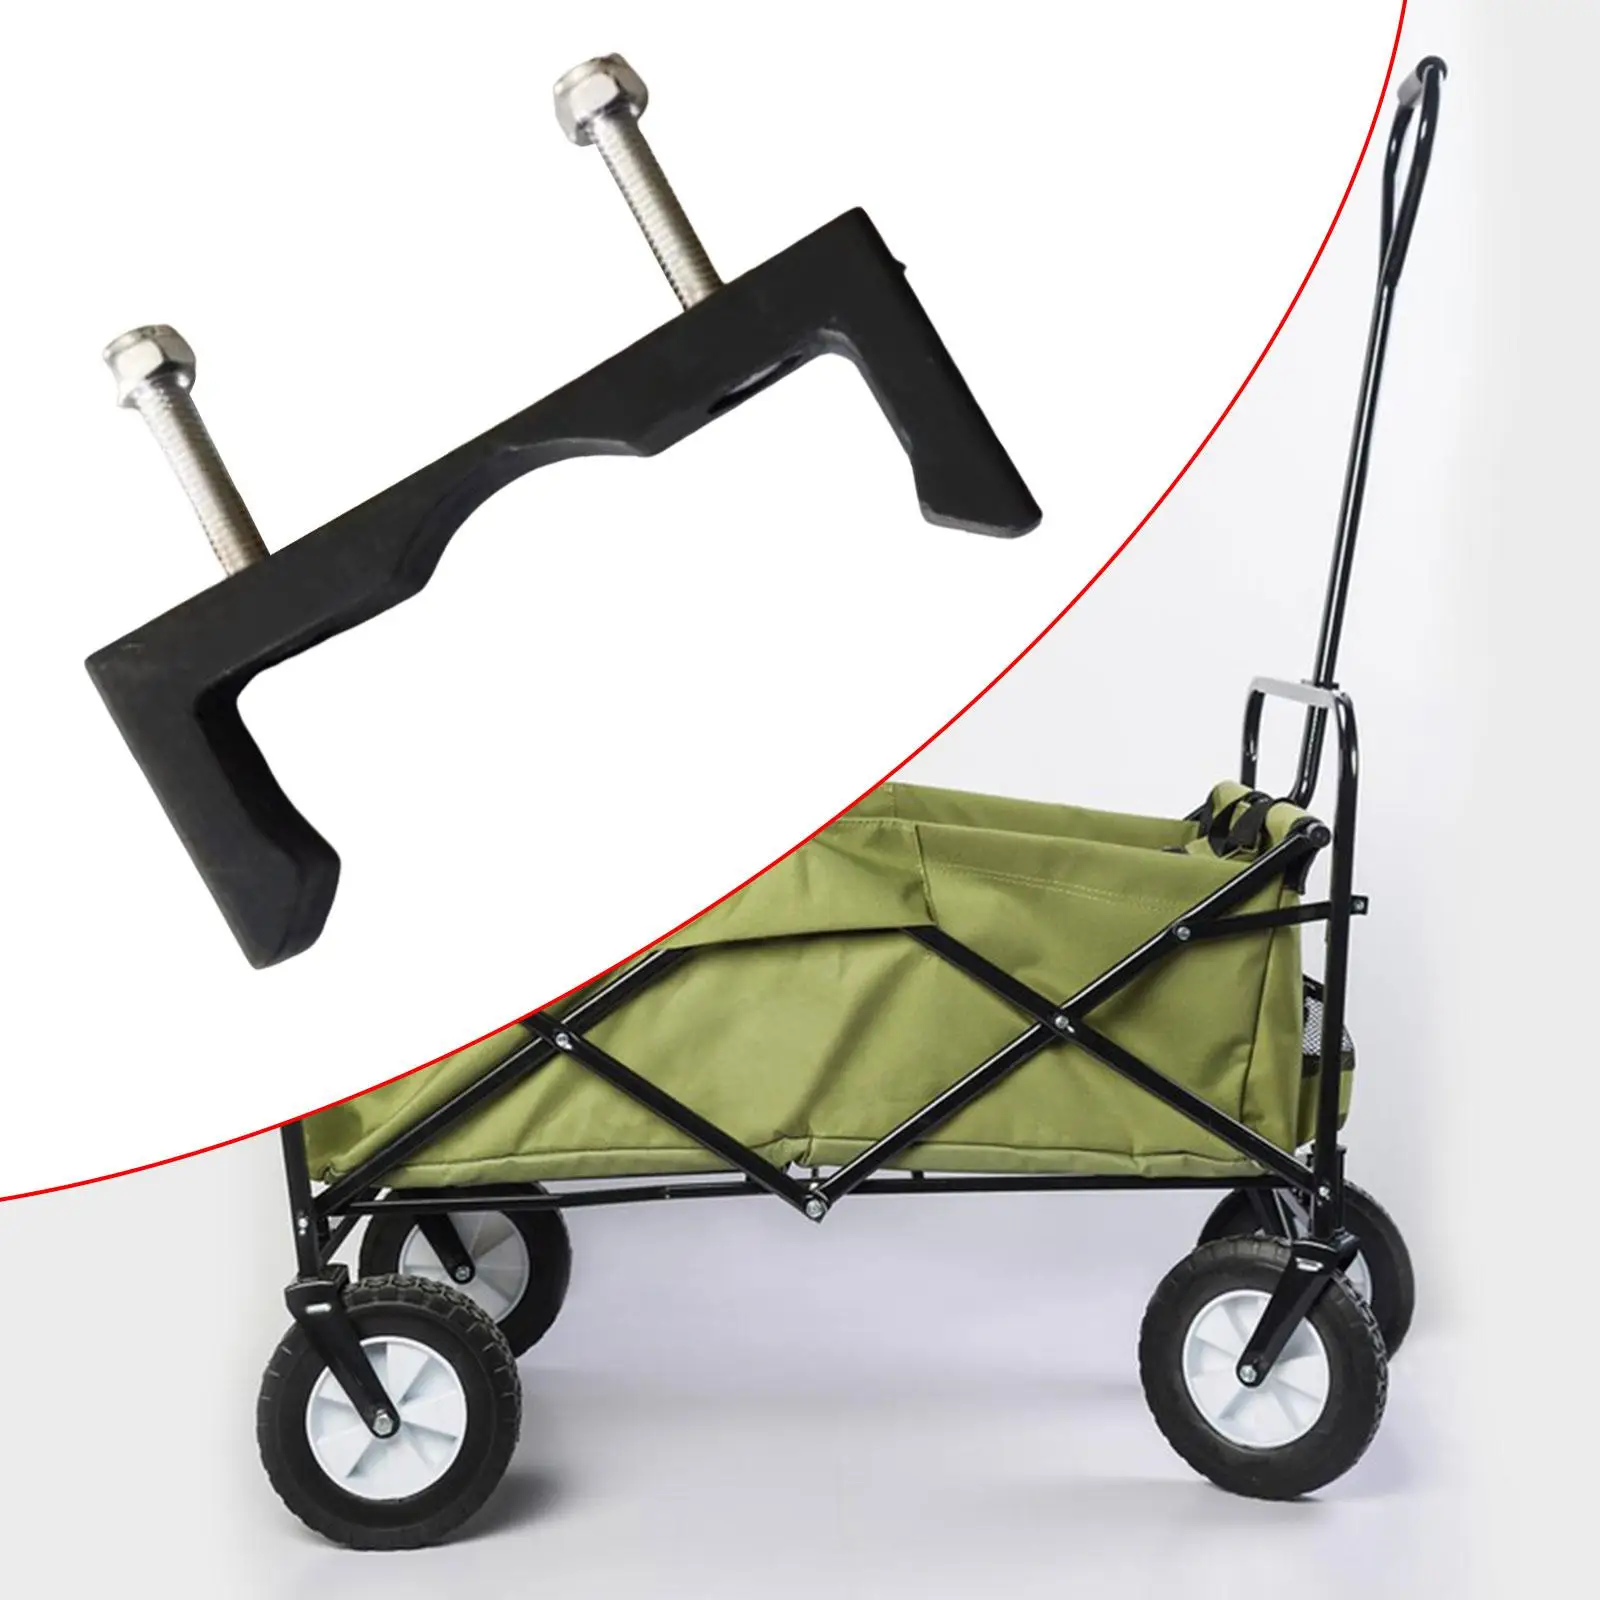 Utility Wagon Cart Pull Push Handle Fixed Buckle Compact for Camping Outdoor